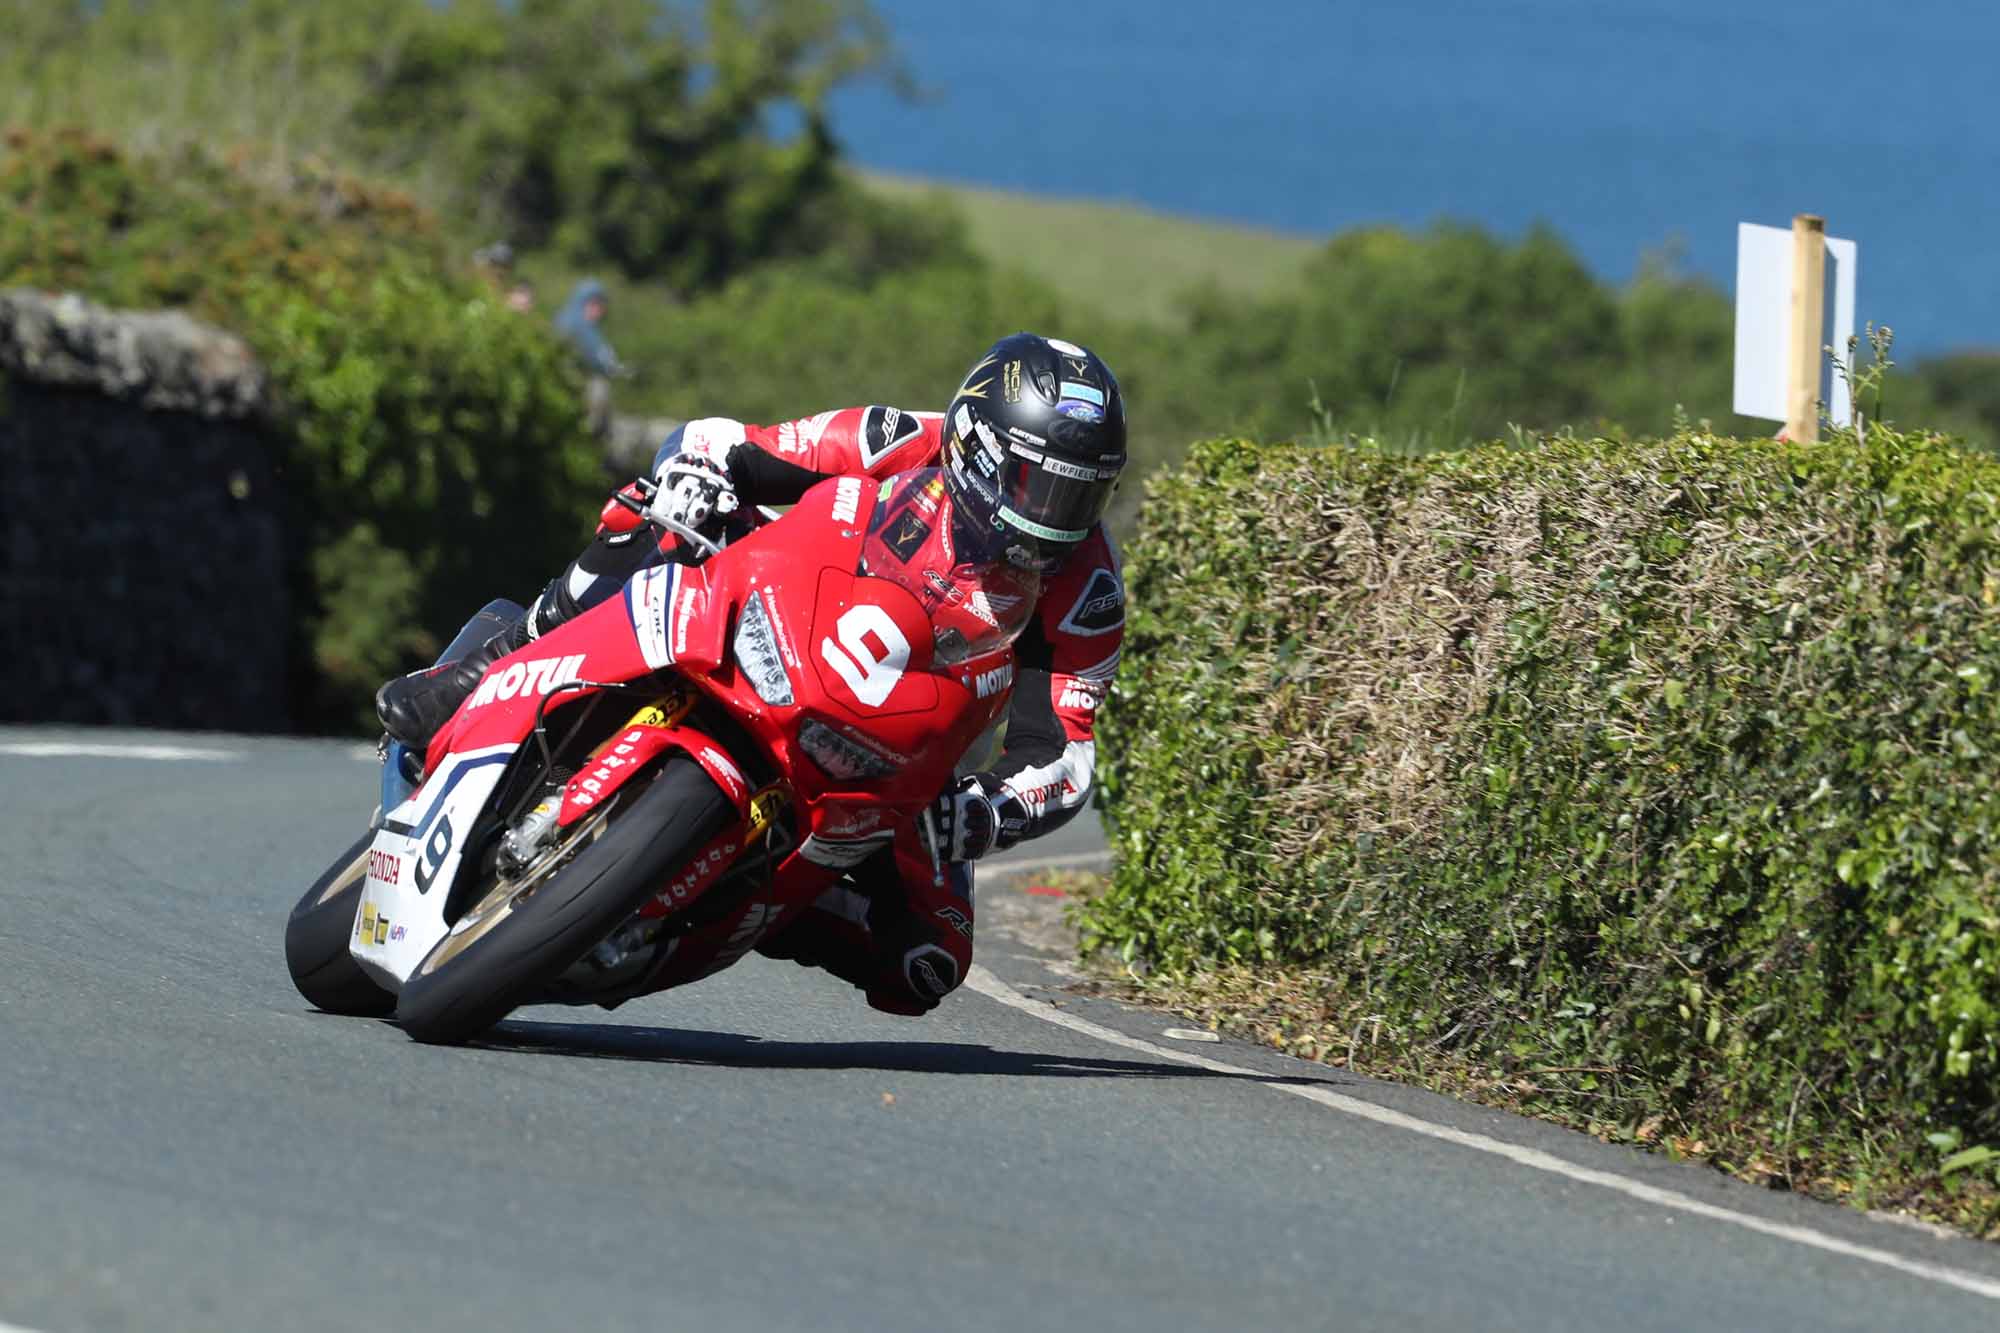 TT – Second victory in one day for Peter Hickman (Superstock TT)